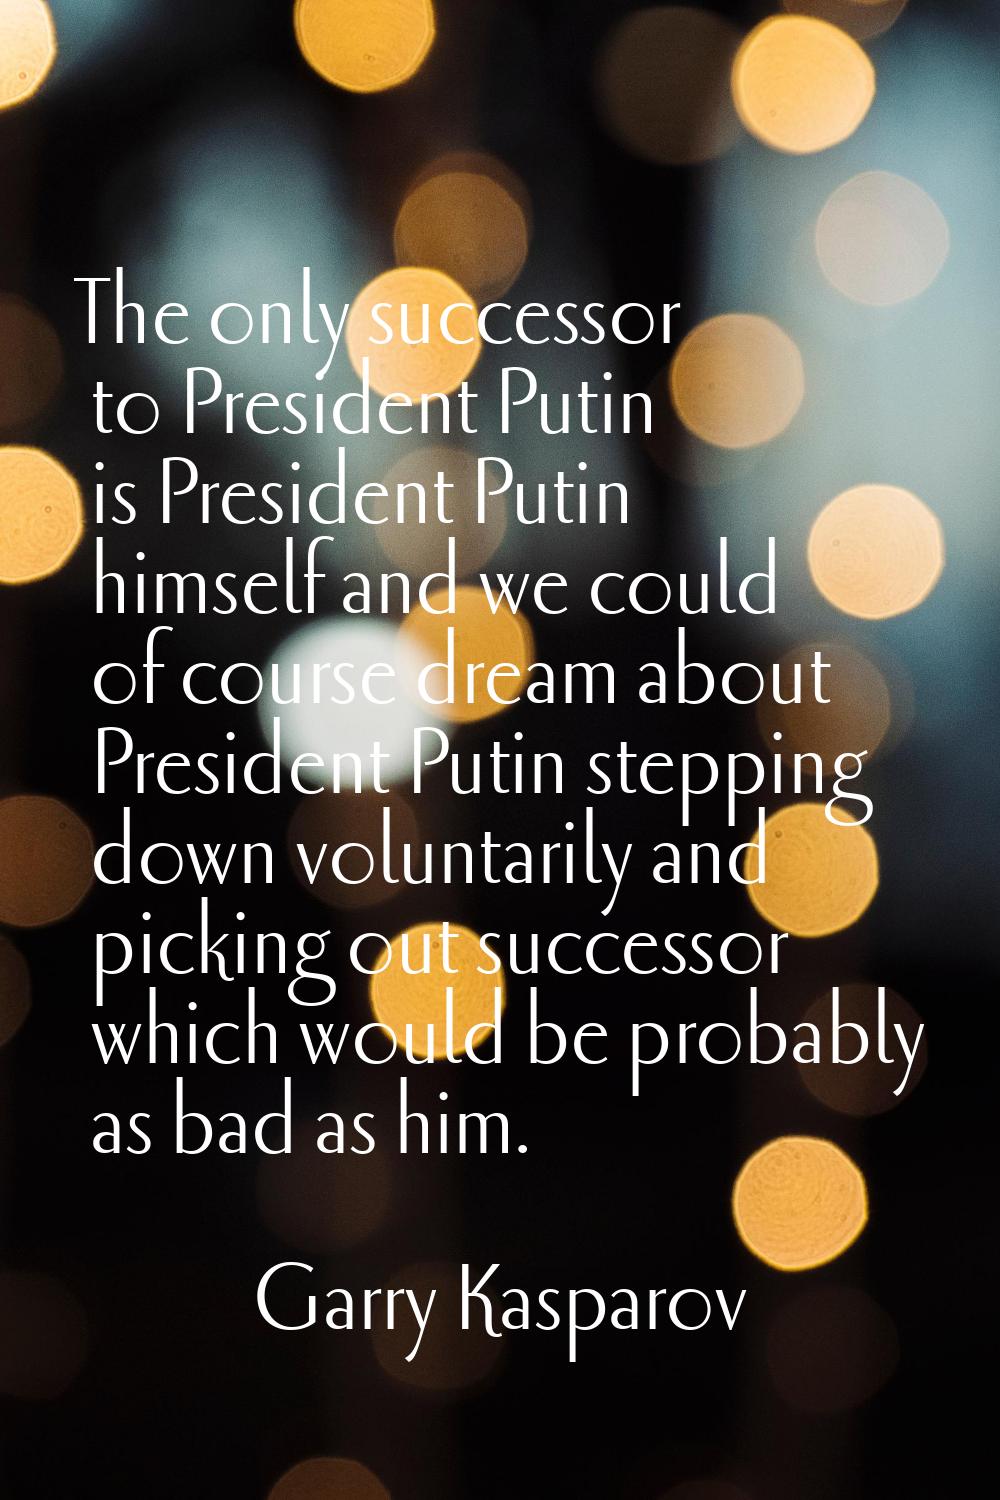 The only successor to President Putin is President Putin himself and we could of course dream about